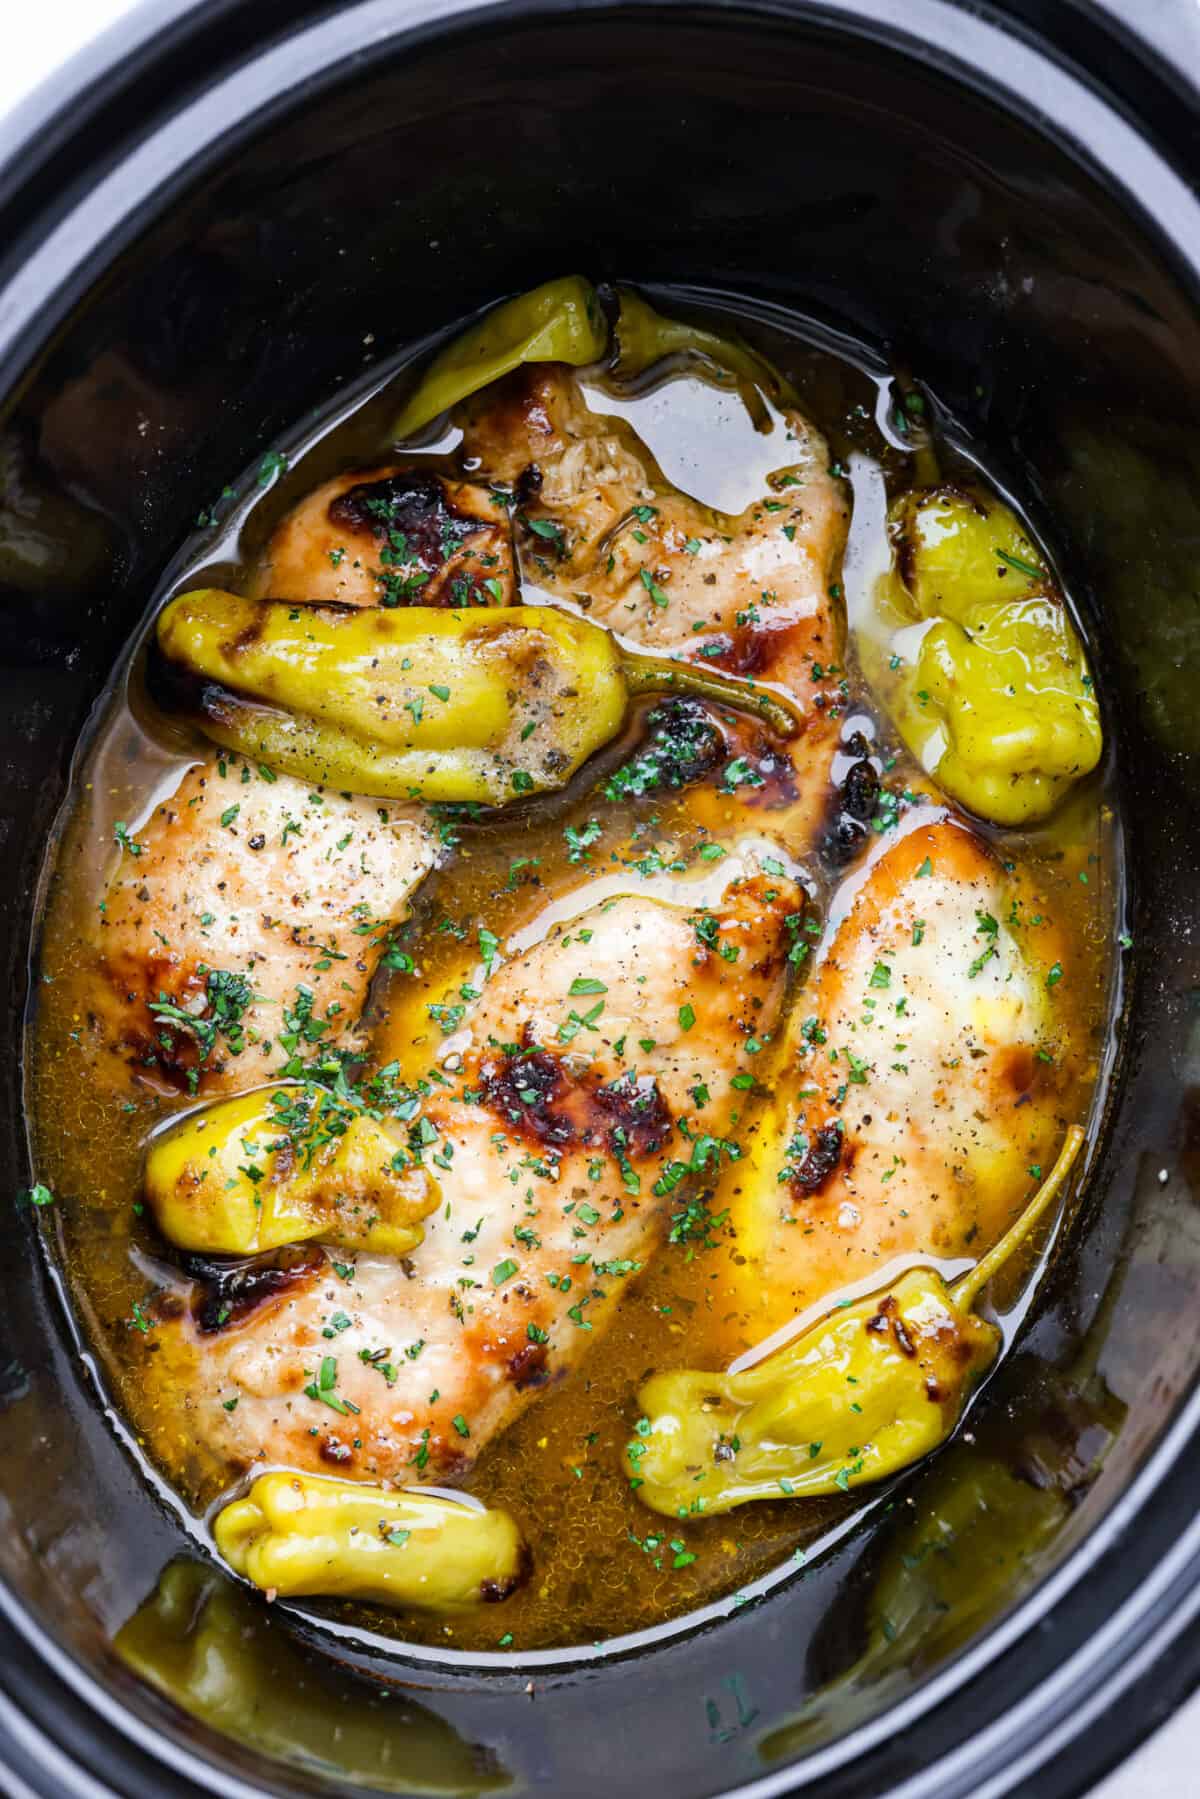 Cooked Mississippi chicken in a crockpot.